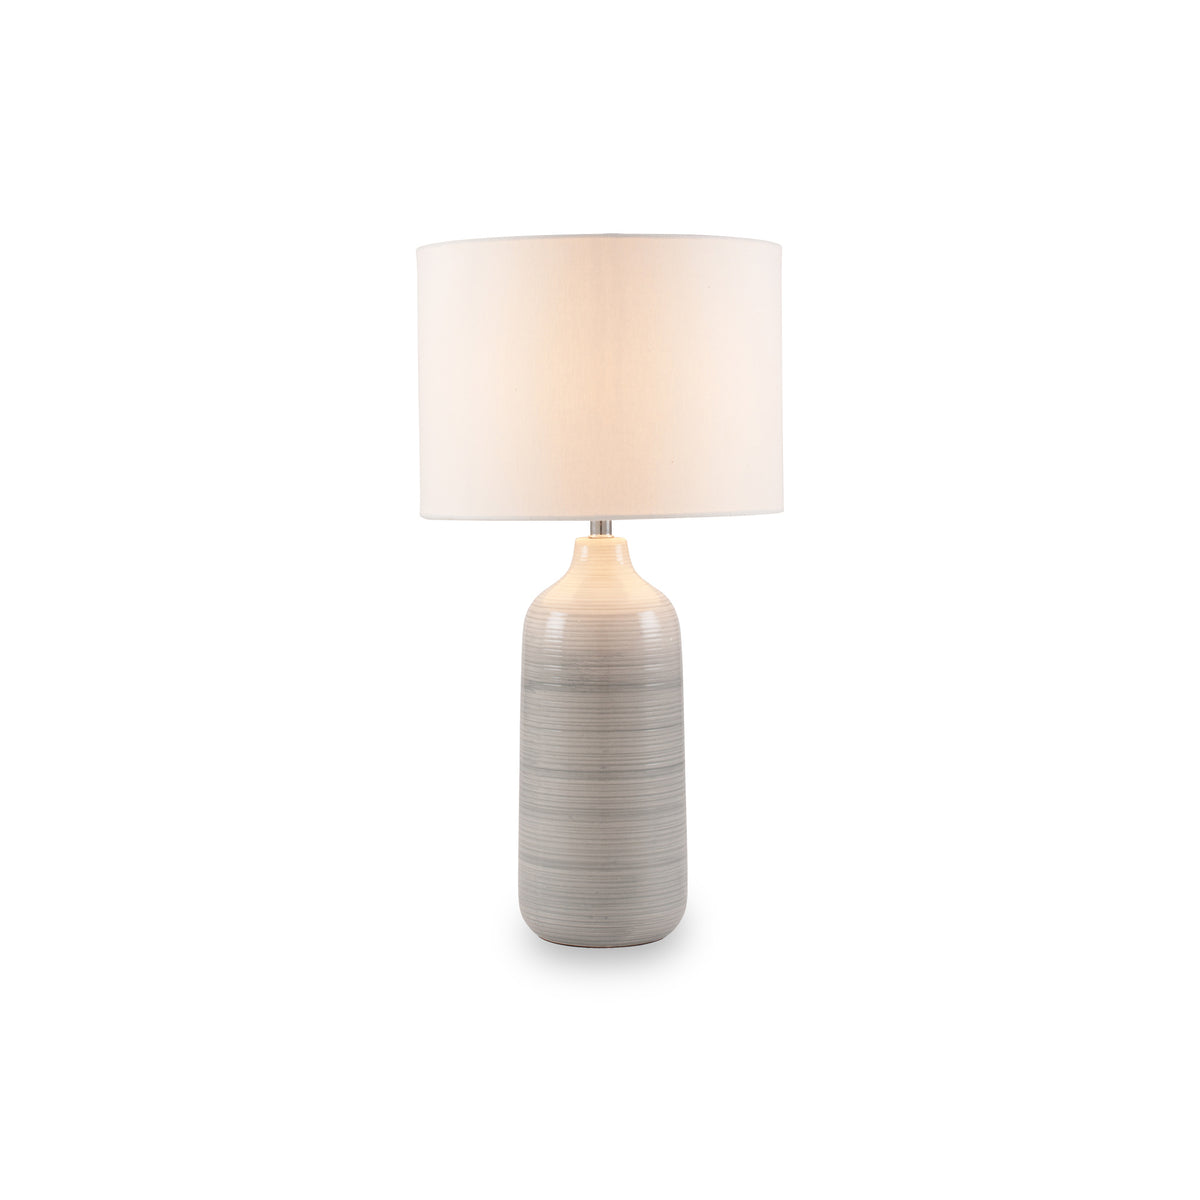 Venus Blue and Grey Ombre Ceramic Table Lamp from Roseland Furniture